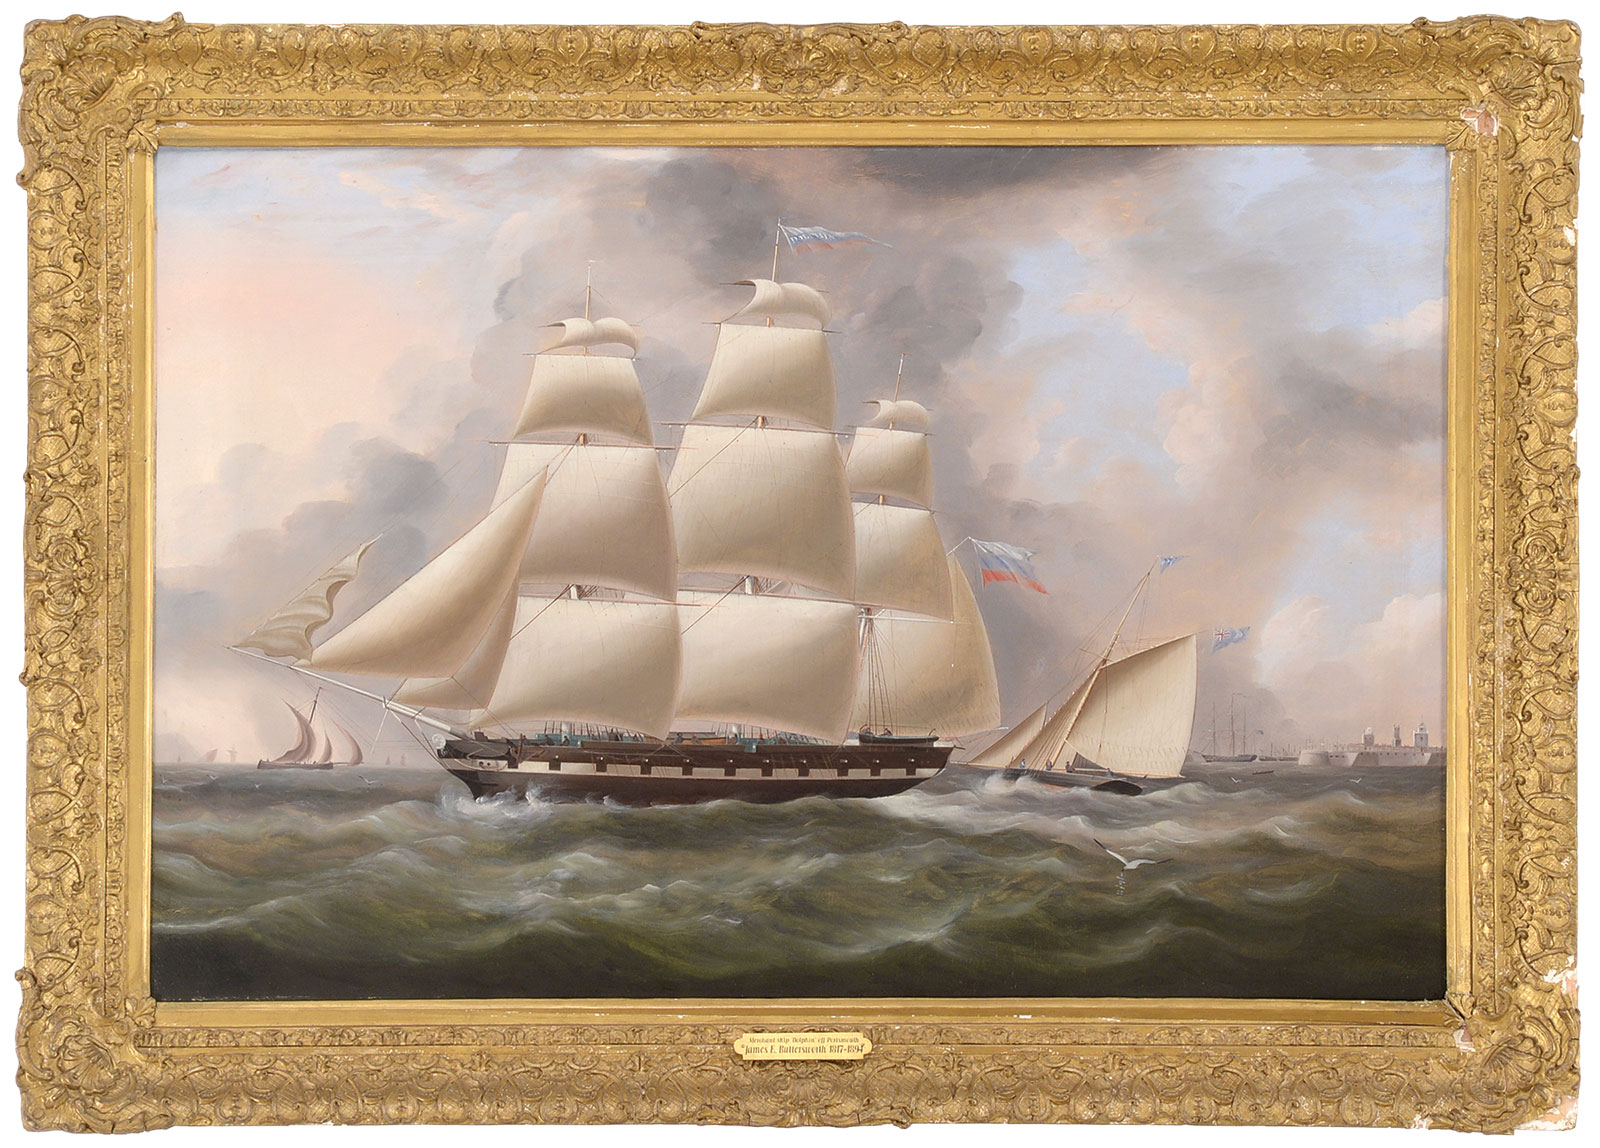 James E. Buttersworth (American/British, 1817-1894) Portrait of the Merchant Ship Dolphin Off Portsmouth England, estimated at $10,000-15,000.